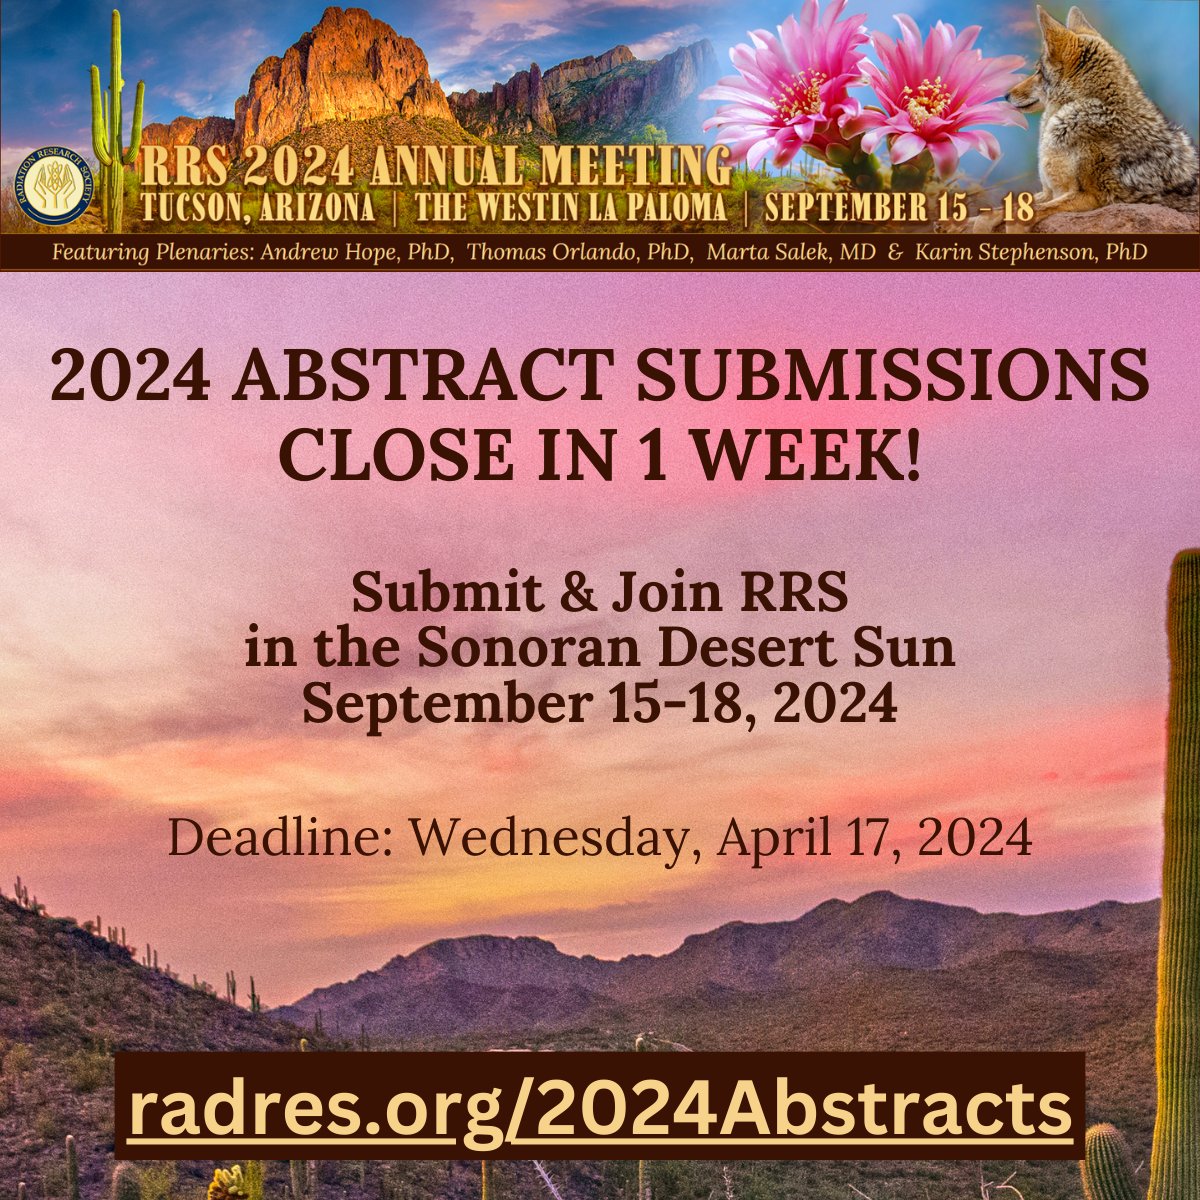 1 Week to Submit your Abstract for a chance to take the podium at RRS 2024! Learn More: radres.org/page/2024CallA… #abstracts, #2024Abstracts, #RadiationResearchSociety, #radiationsciences, #70thAnnualMeeting, #Tucson, #Arizona, #changingstandardsofcare,